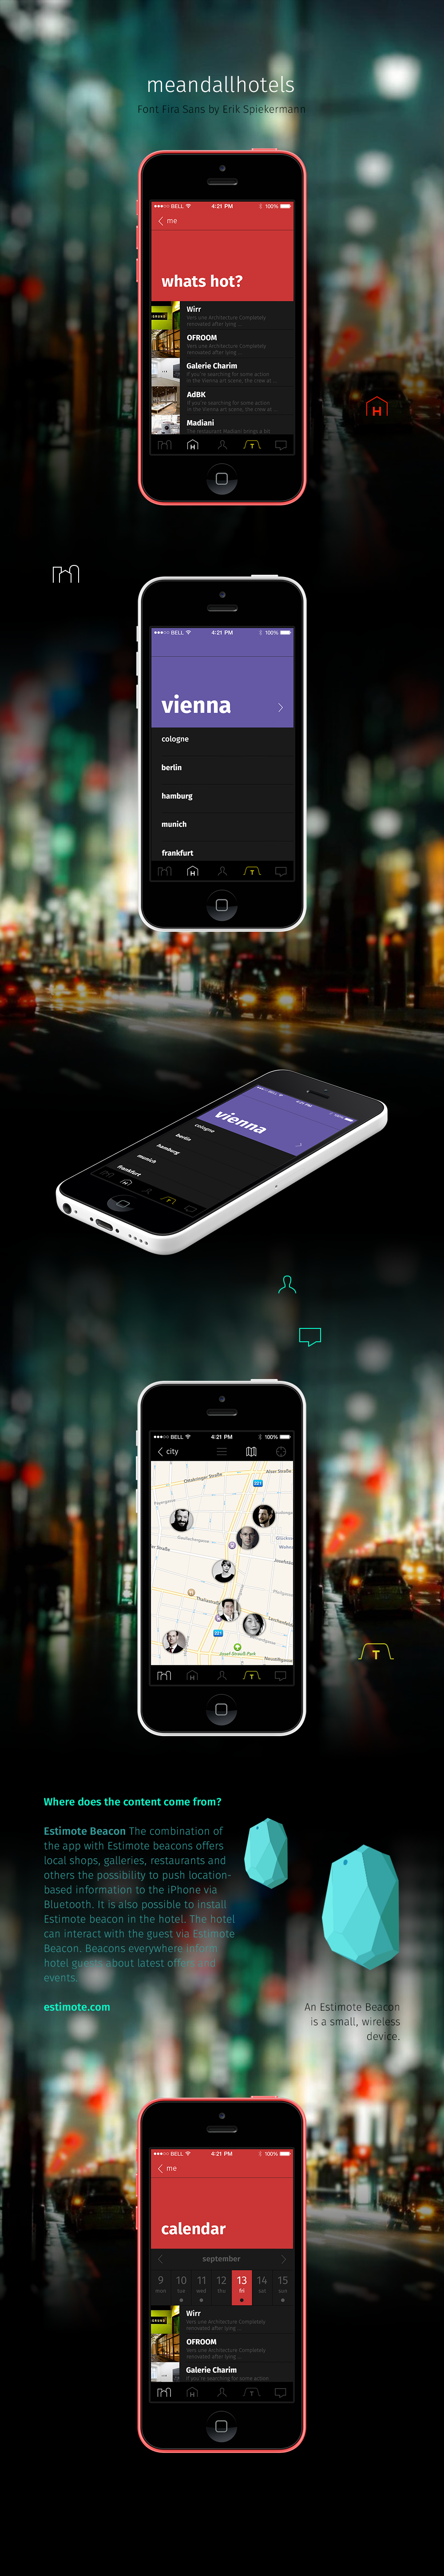 meandall app ios7 user interface design UI ux hotel iphone5 mobile apple typo FiraSans